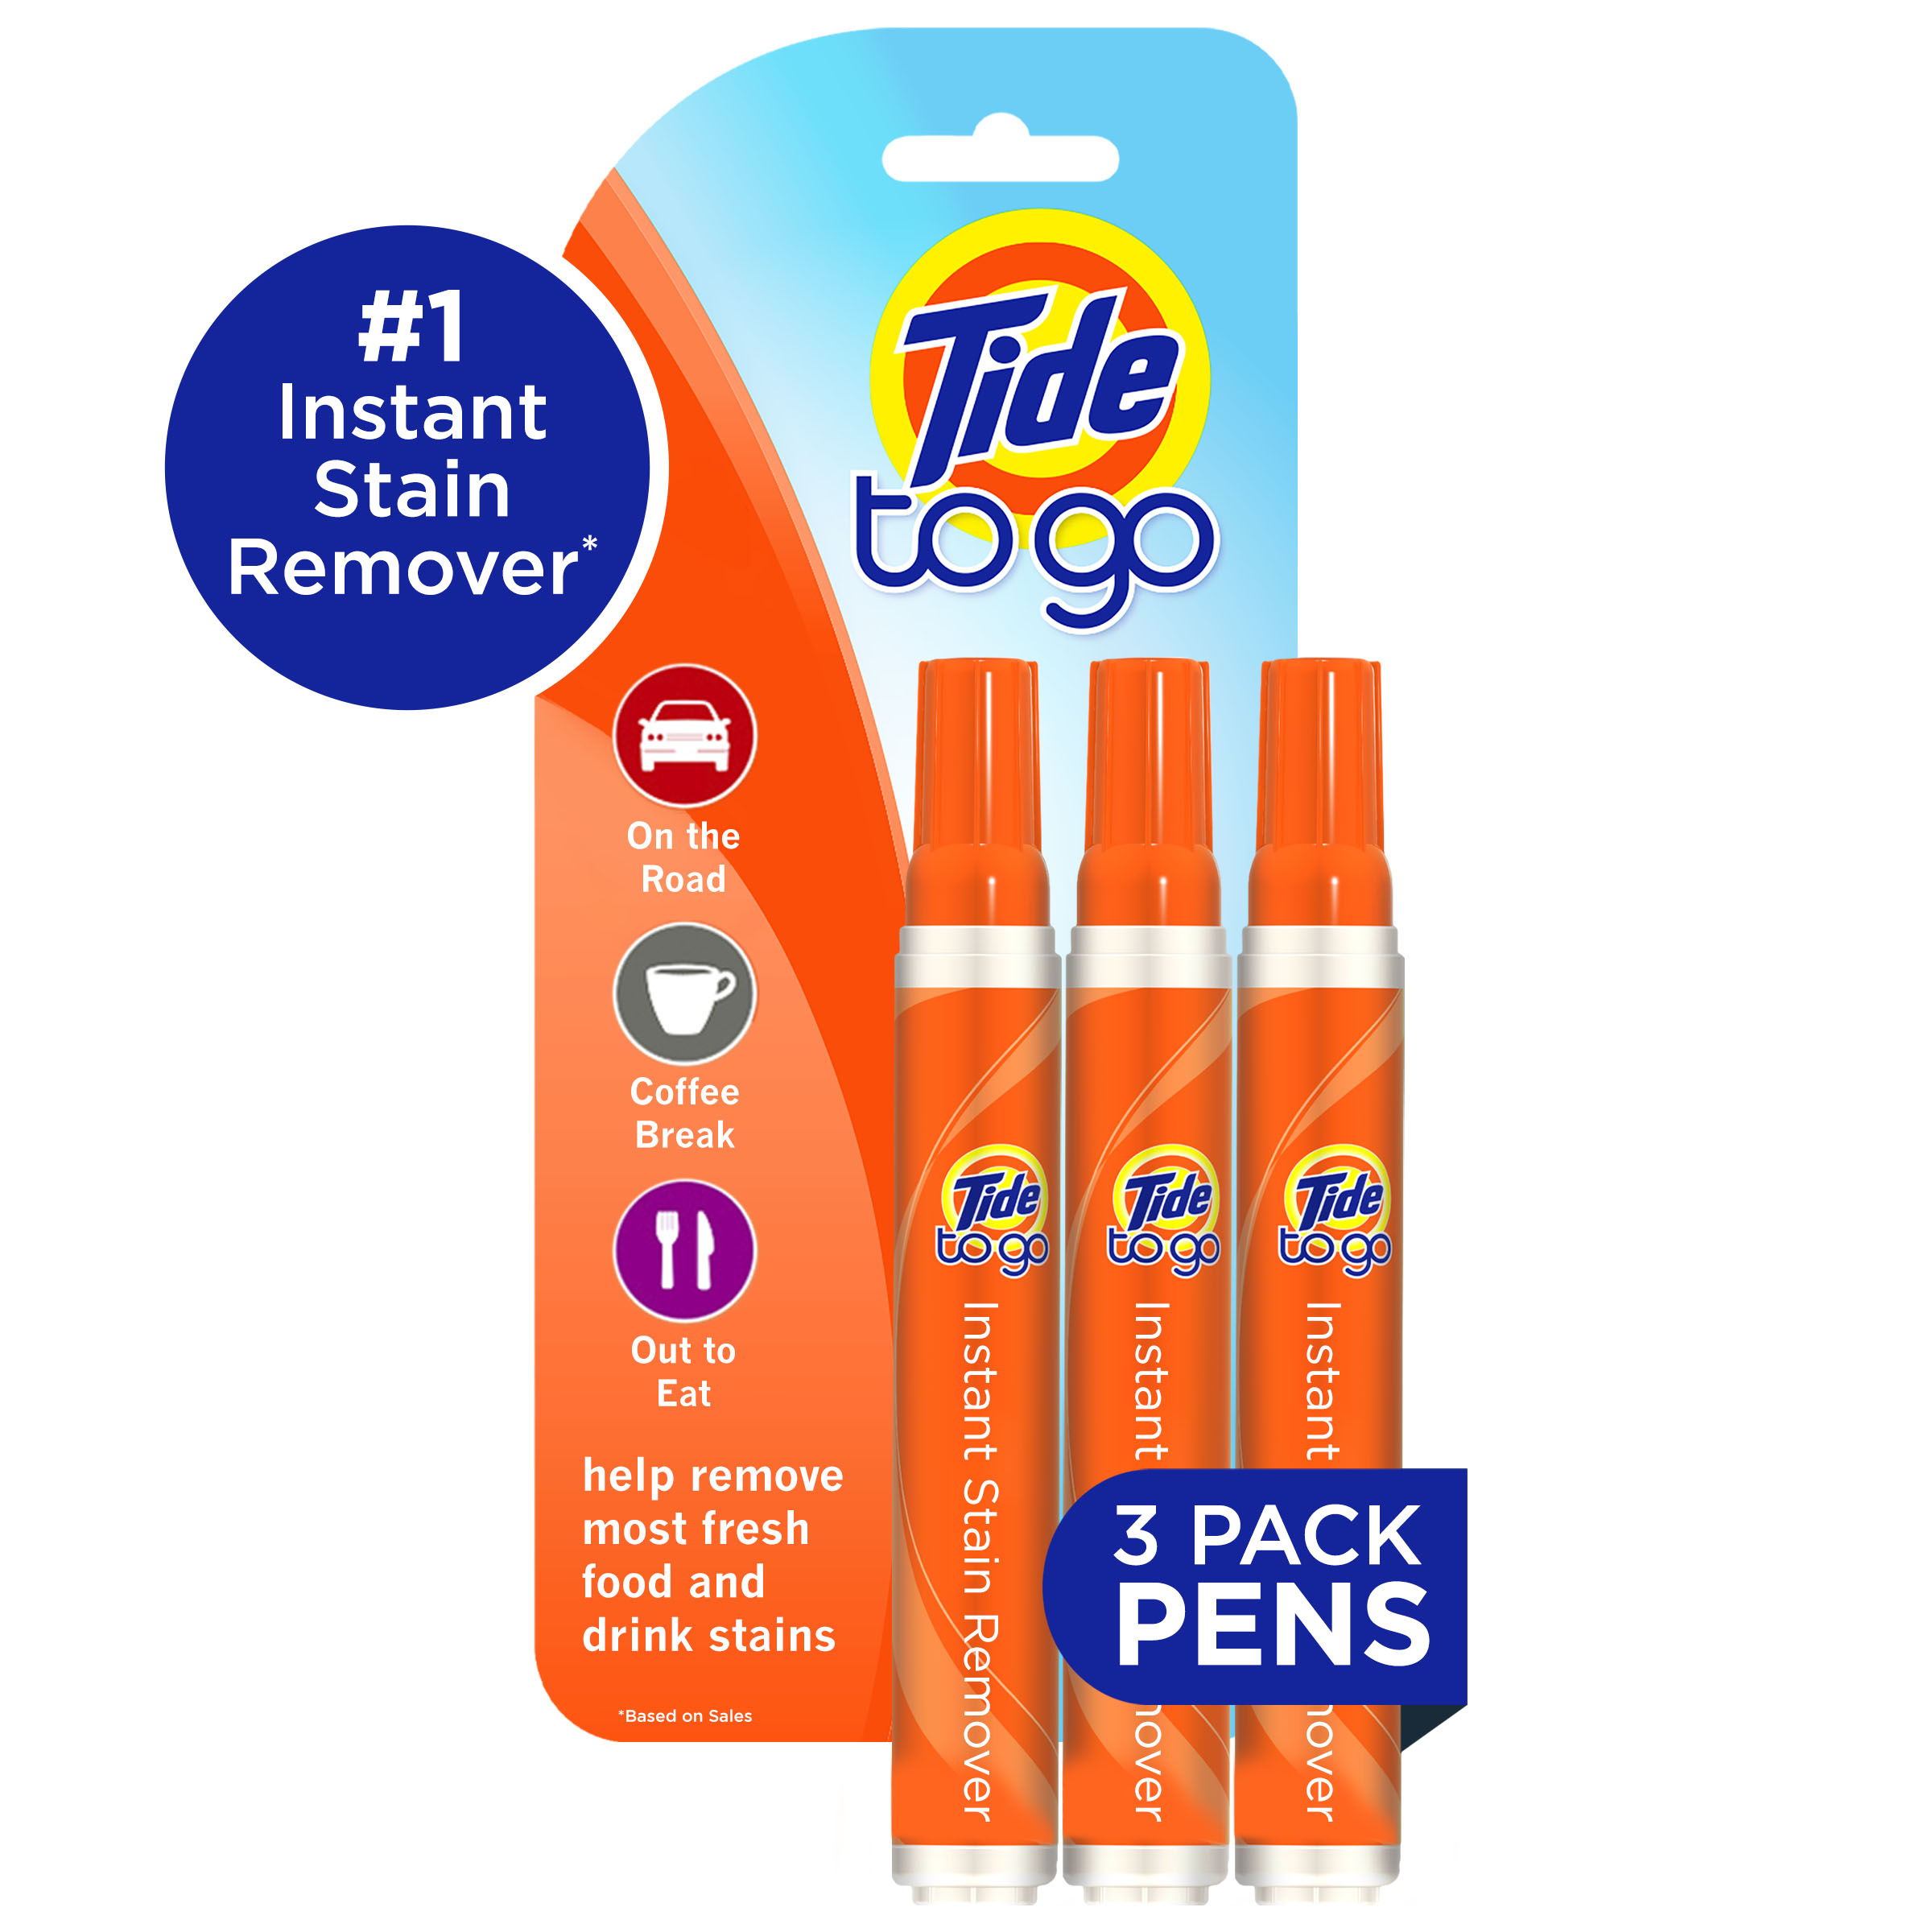 Tide To Go Instant Stain Remover Pen and Laundry Spot Cleaner, Travel Size Stain Sticks, 3 Count - image 1 of 14